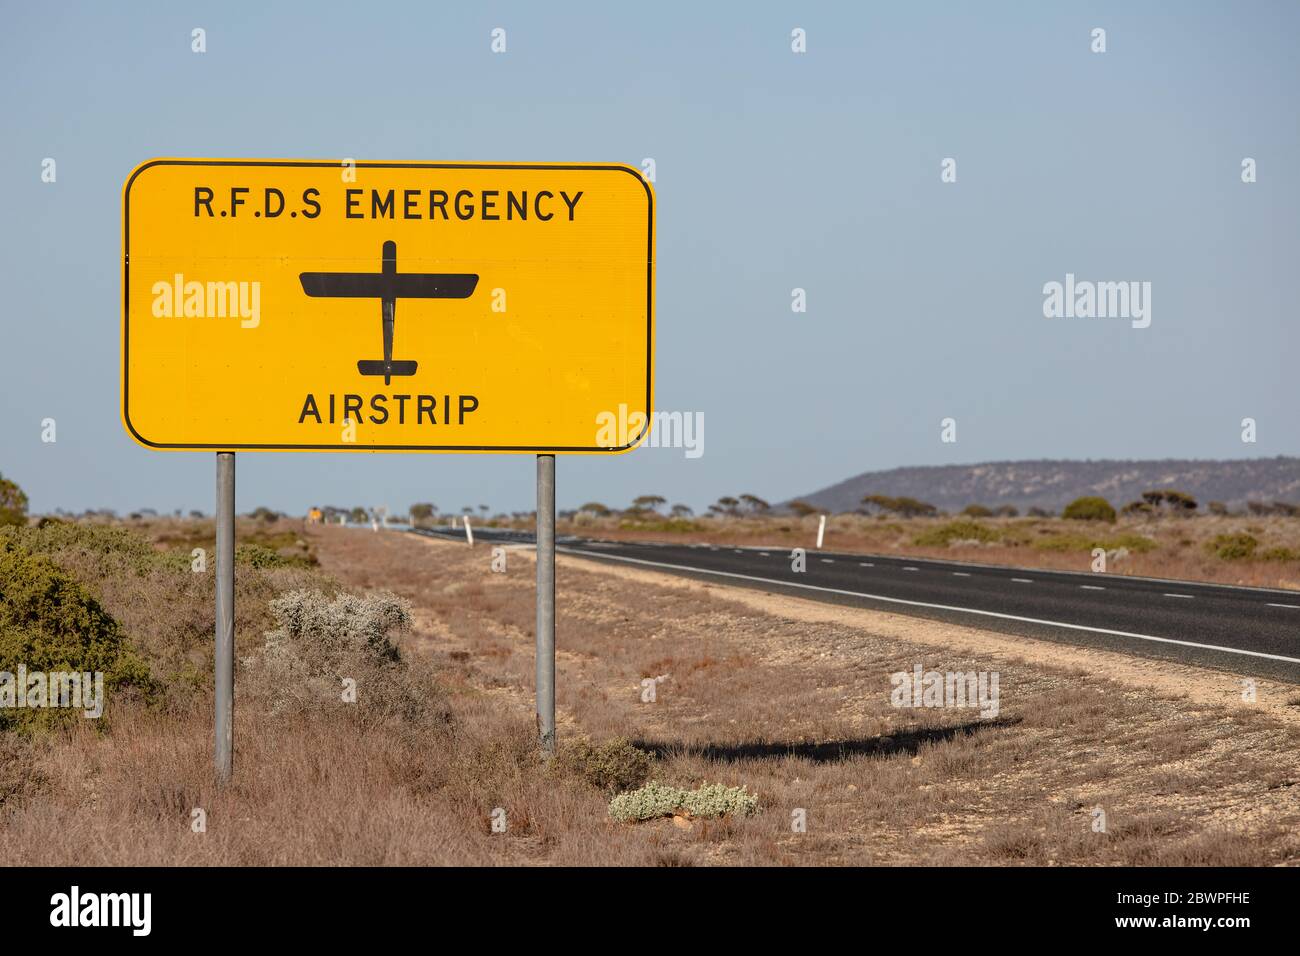 Royal Flying Doctor Emergency Service sign denoting the road may also be used as a landing strip in a medical emergency. Captured in Western Australia Stock Photo